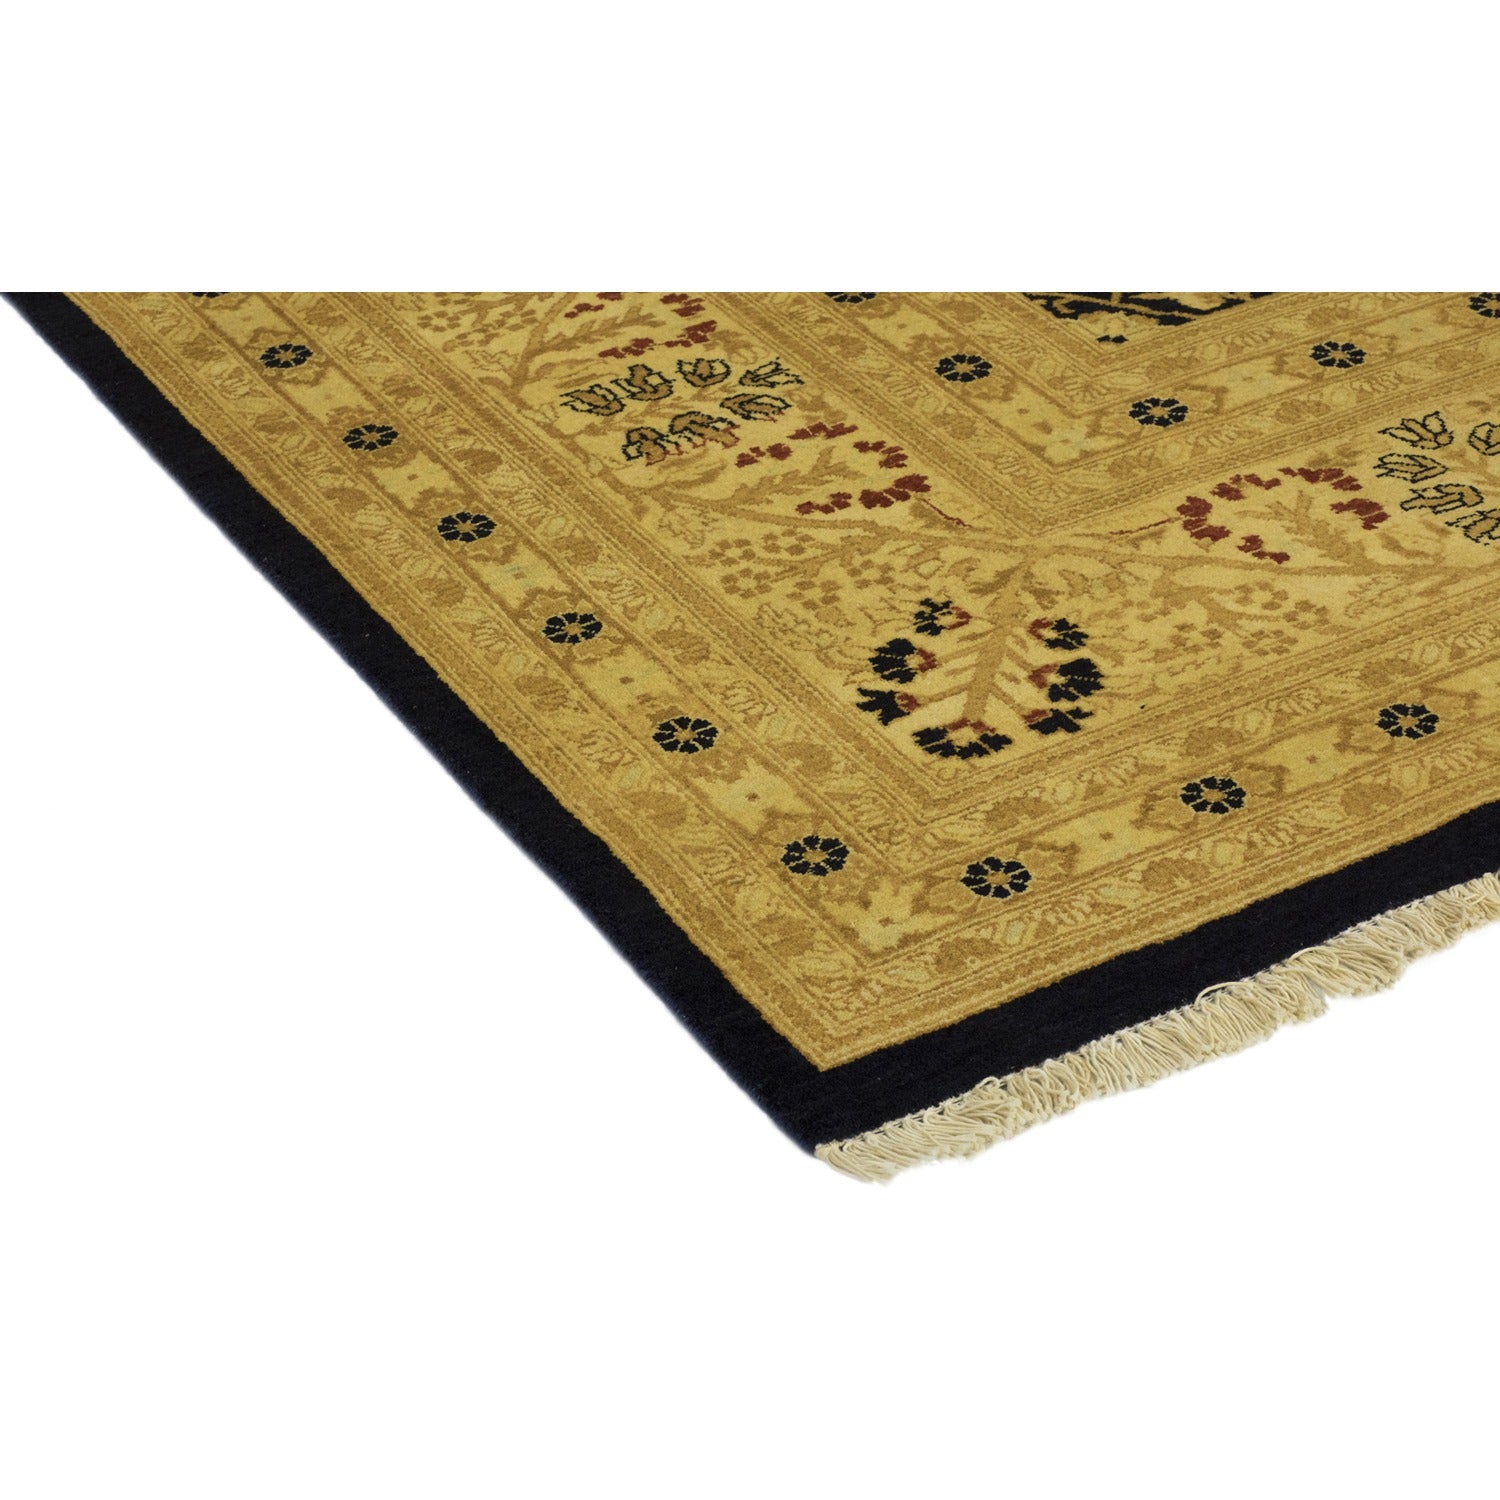 Traditional Persian-style woven rug with symmetrical motifs and fringe.